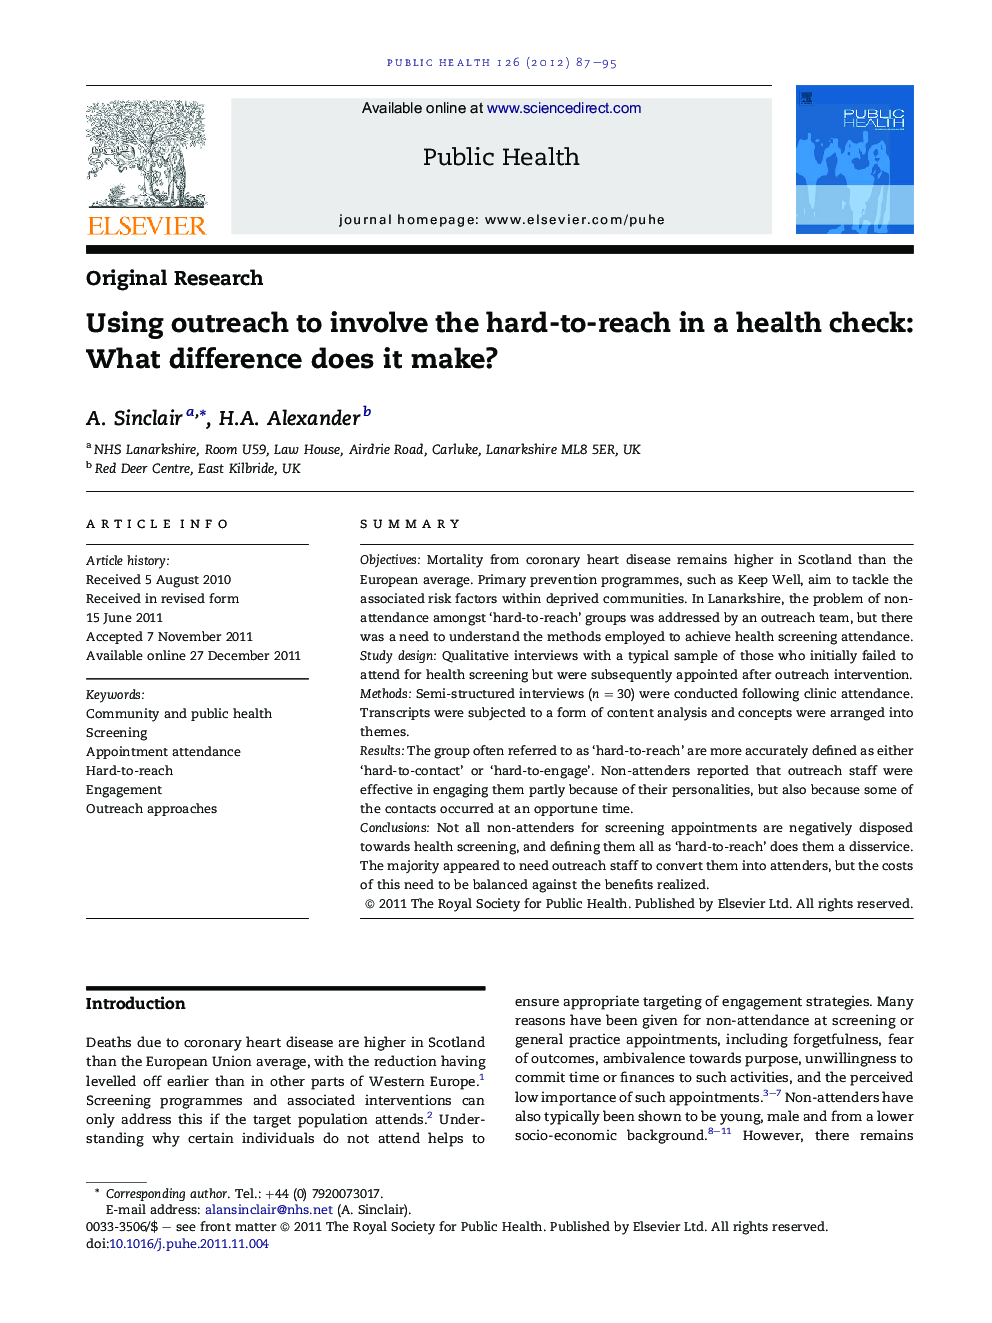 Using outreach to involve the hard-to-reach in a health check: What difference does it make?